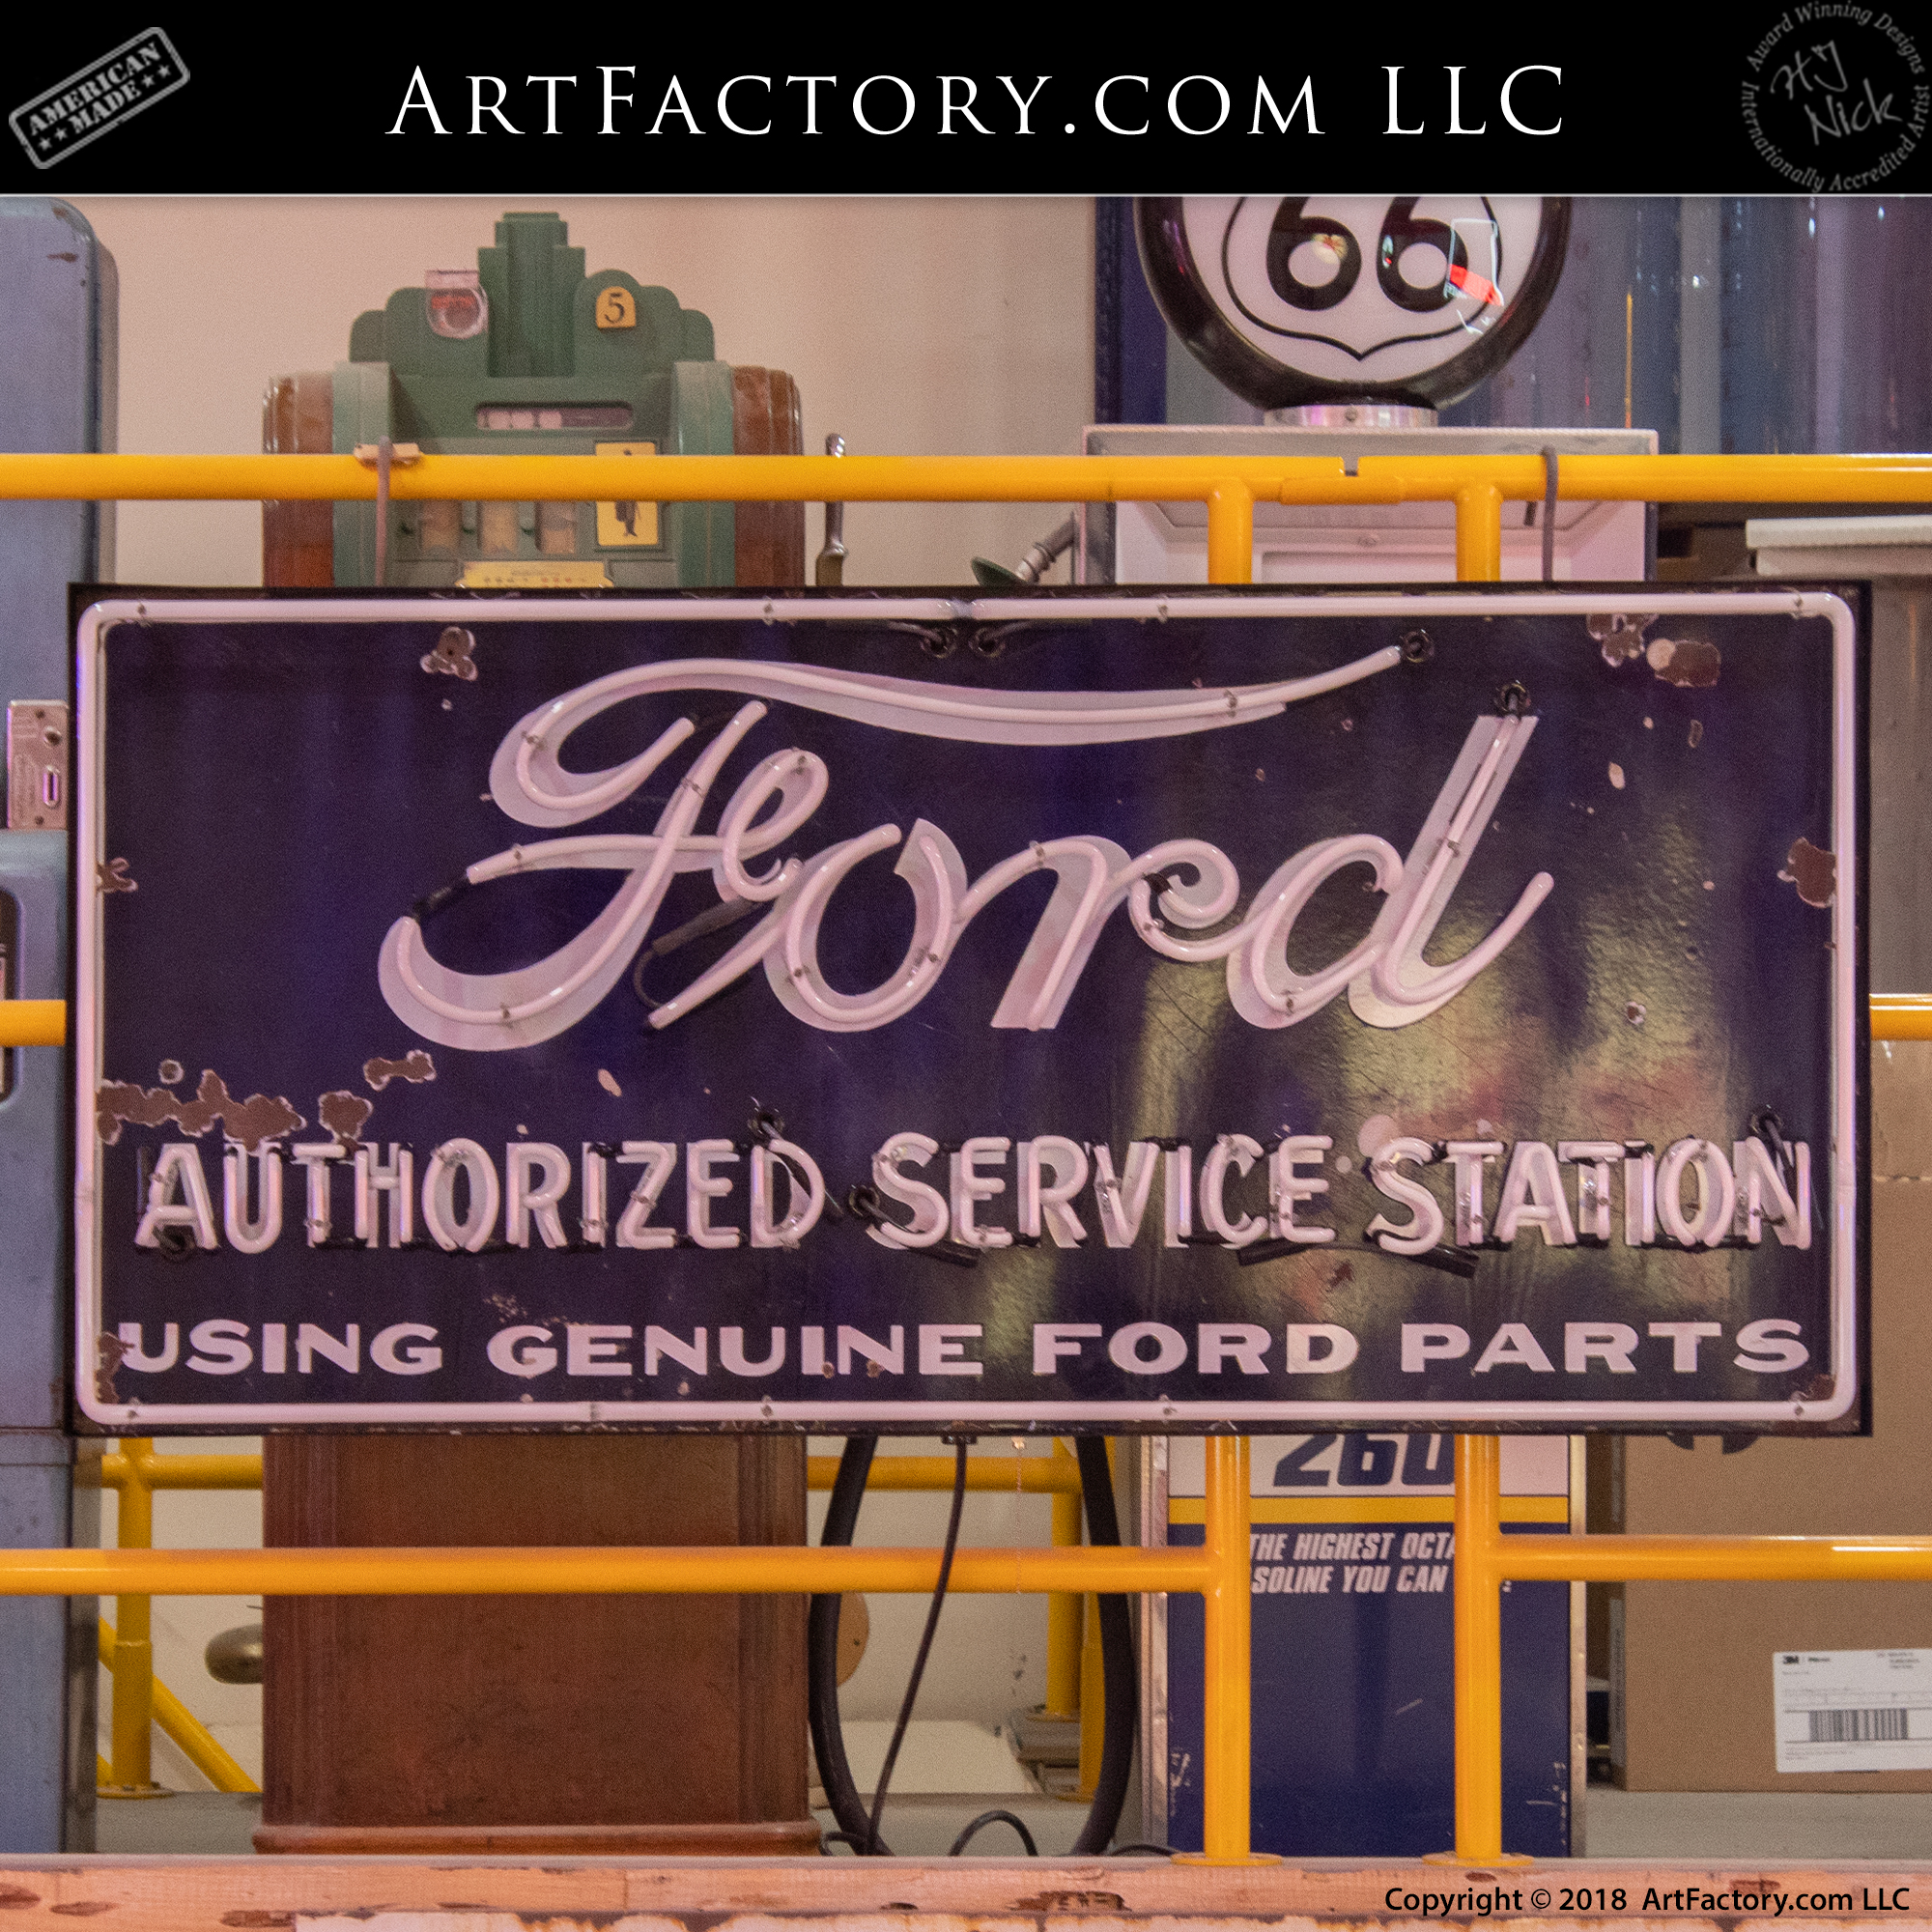 Ford-Authorized-Service-Station-Rectangle-6